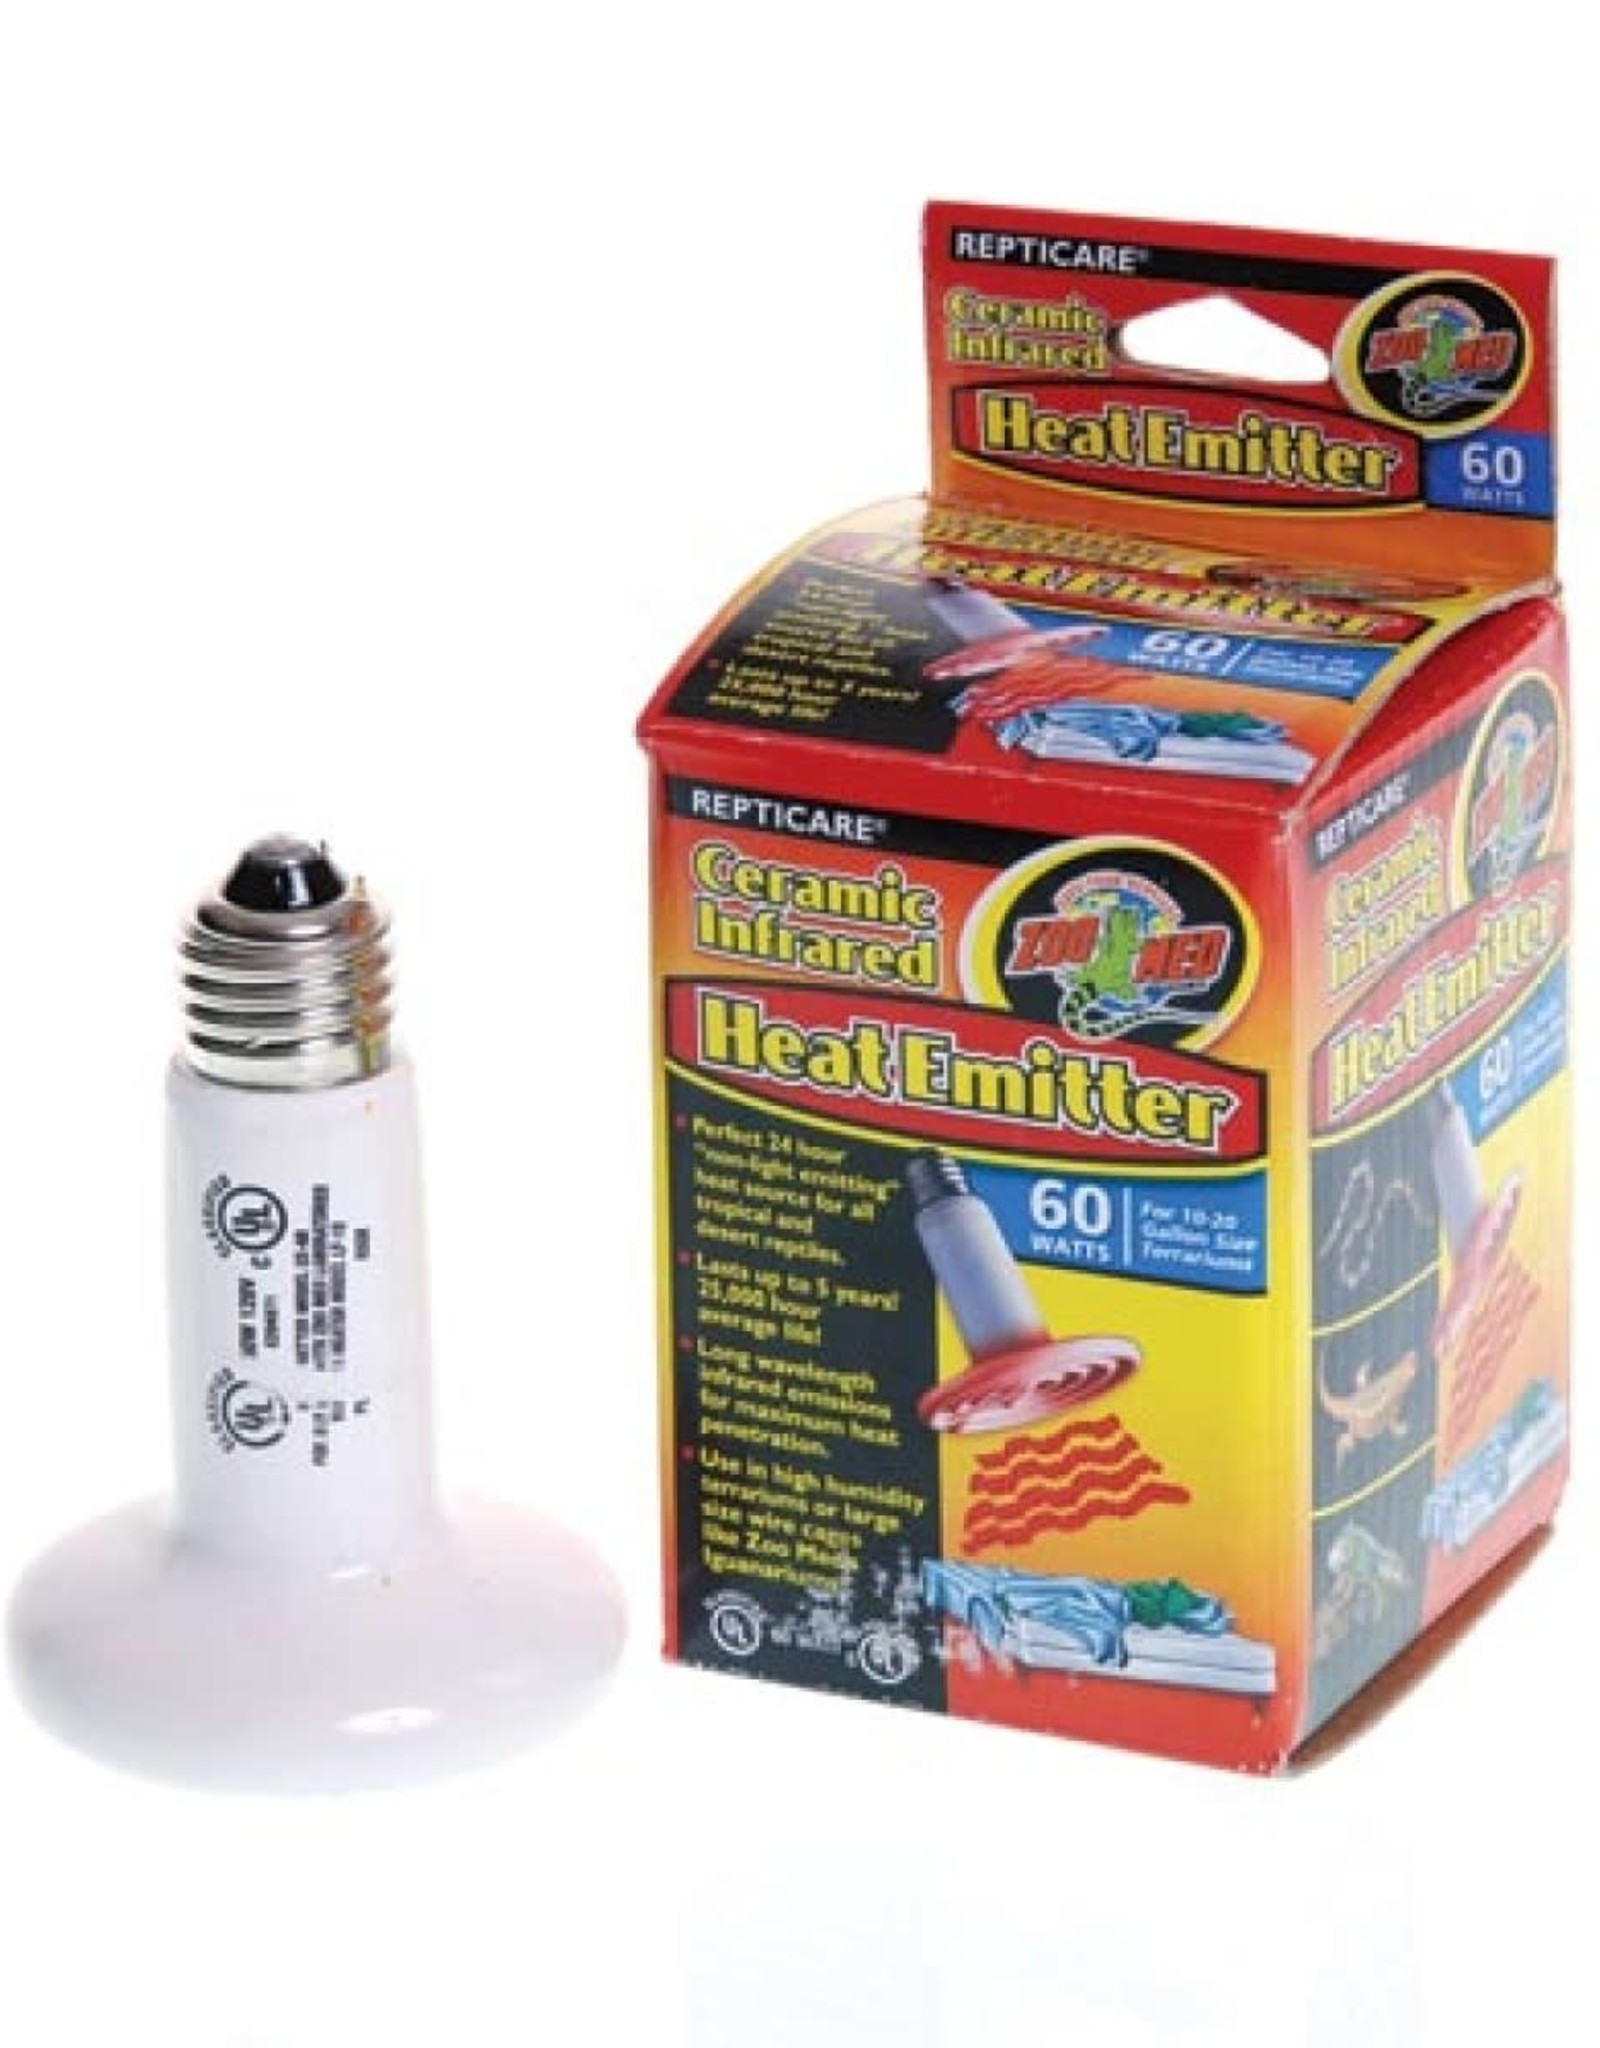 ZOO MED LABORATORIES, INC. ZOO MED- CE-60- REPTICARE- CERAMIC INFRARED HEAT EMITTER- 4X4X5- 60W